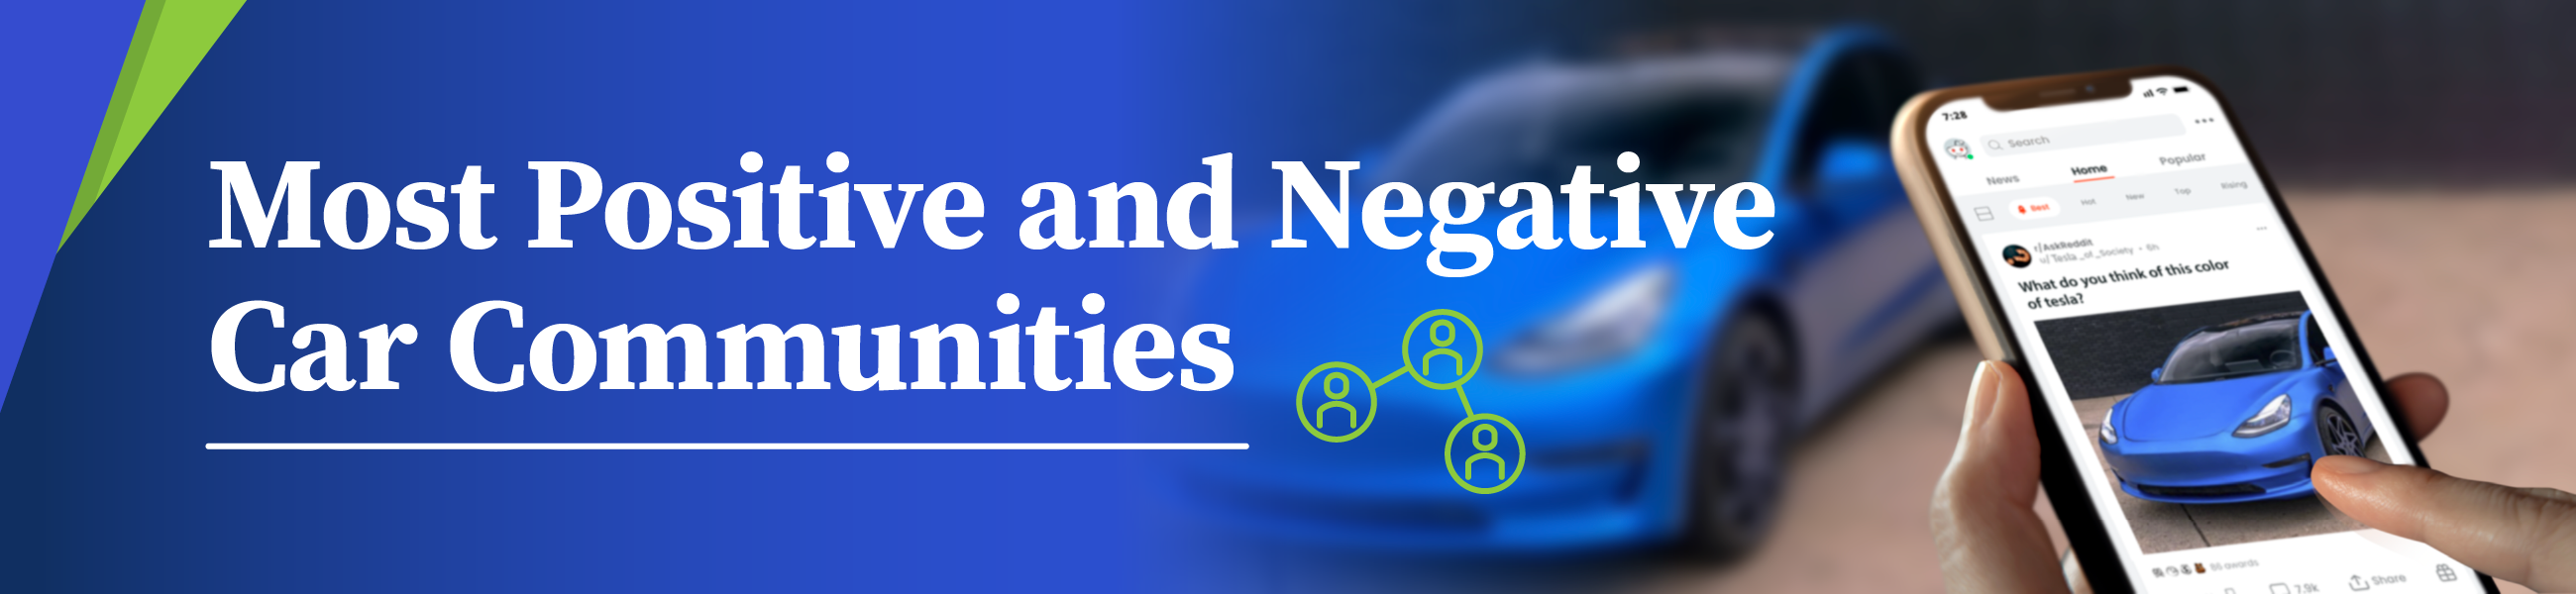 header image most positive and negative car communities